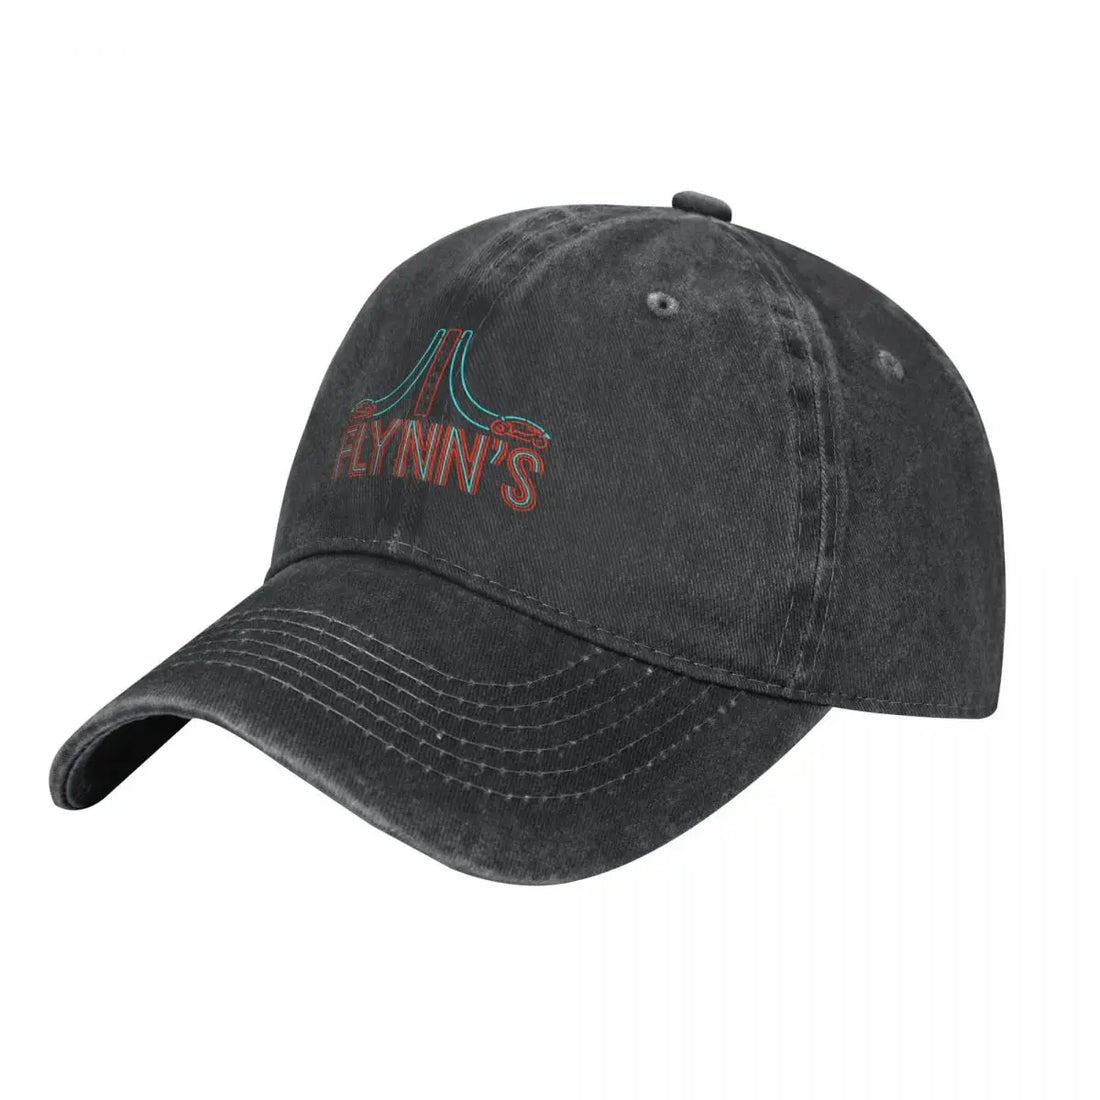 Flynns Place - Tron - 1980s Cowboy Hat Rugby Male Sunhat Cap For Women Men's